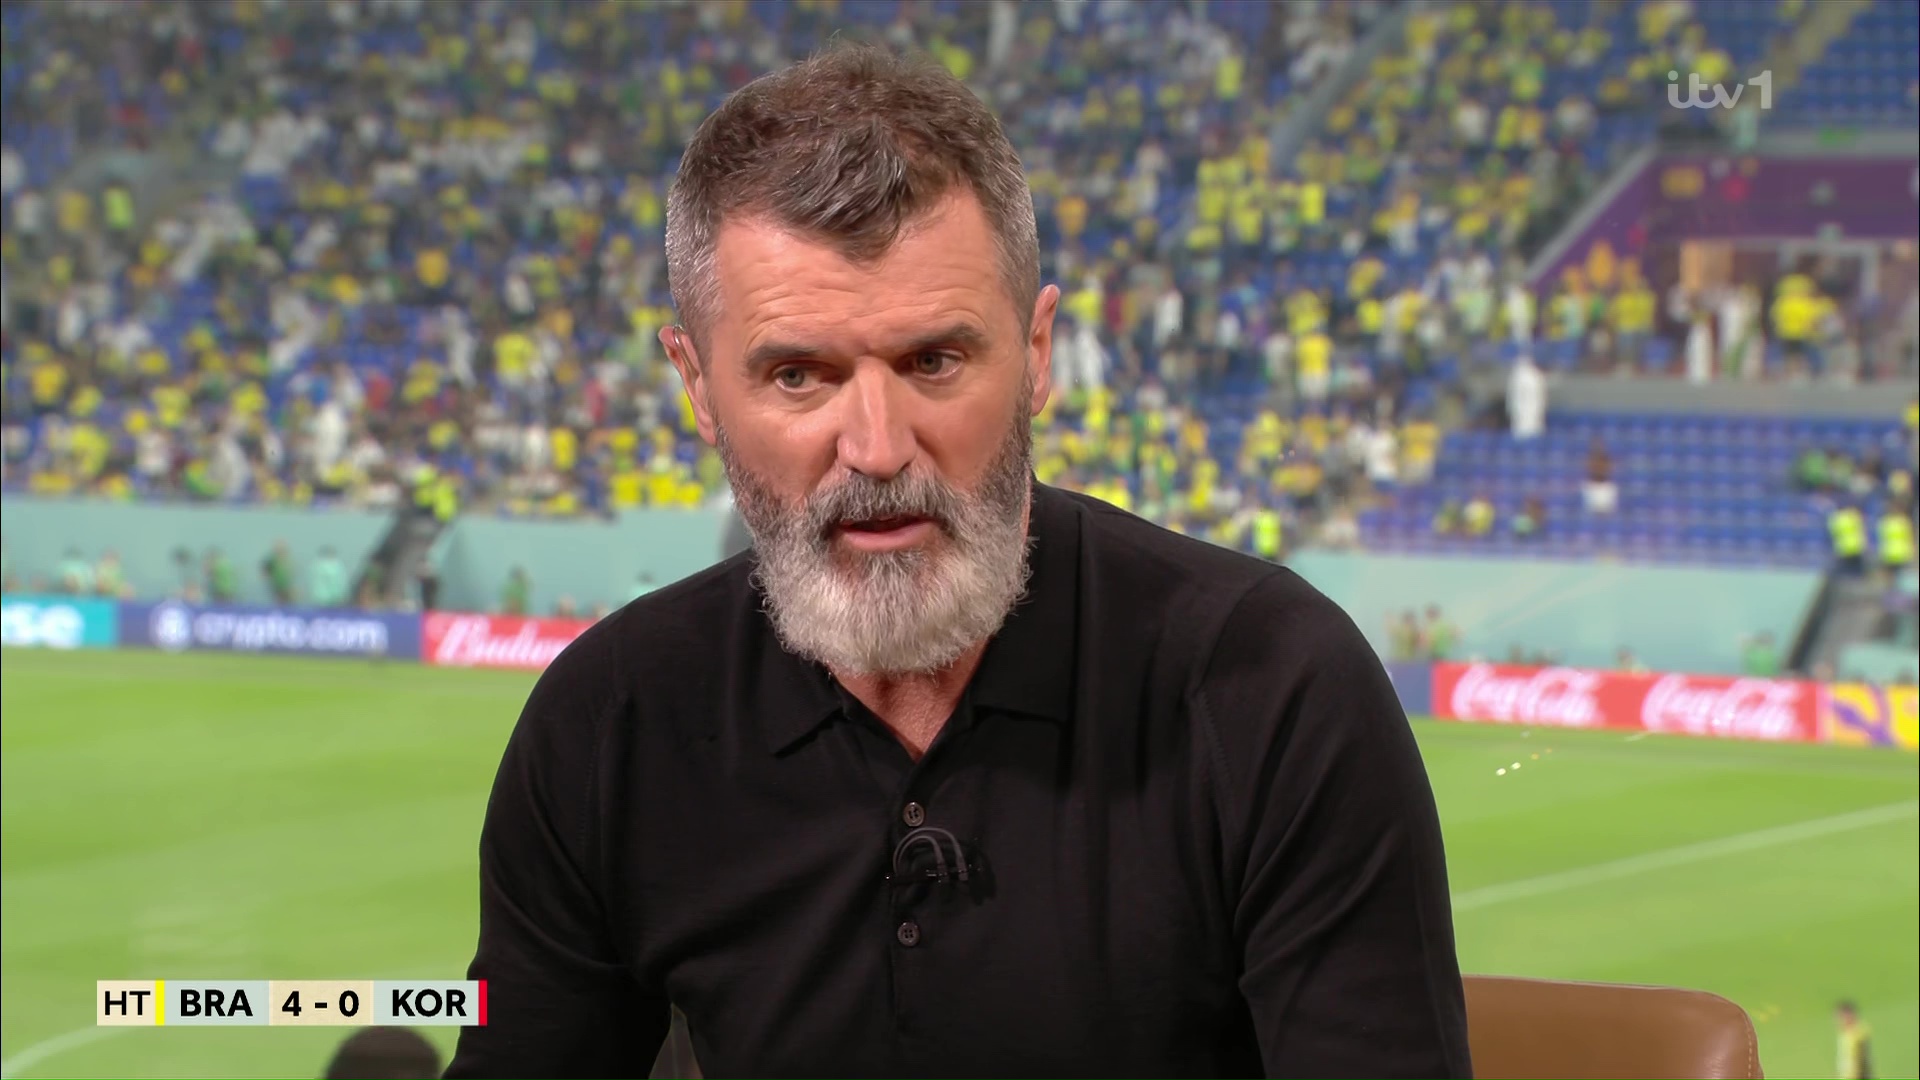 Brazil comes for Roy Keane after his criticisms last night 